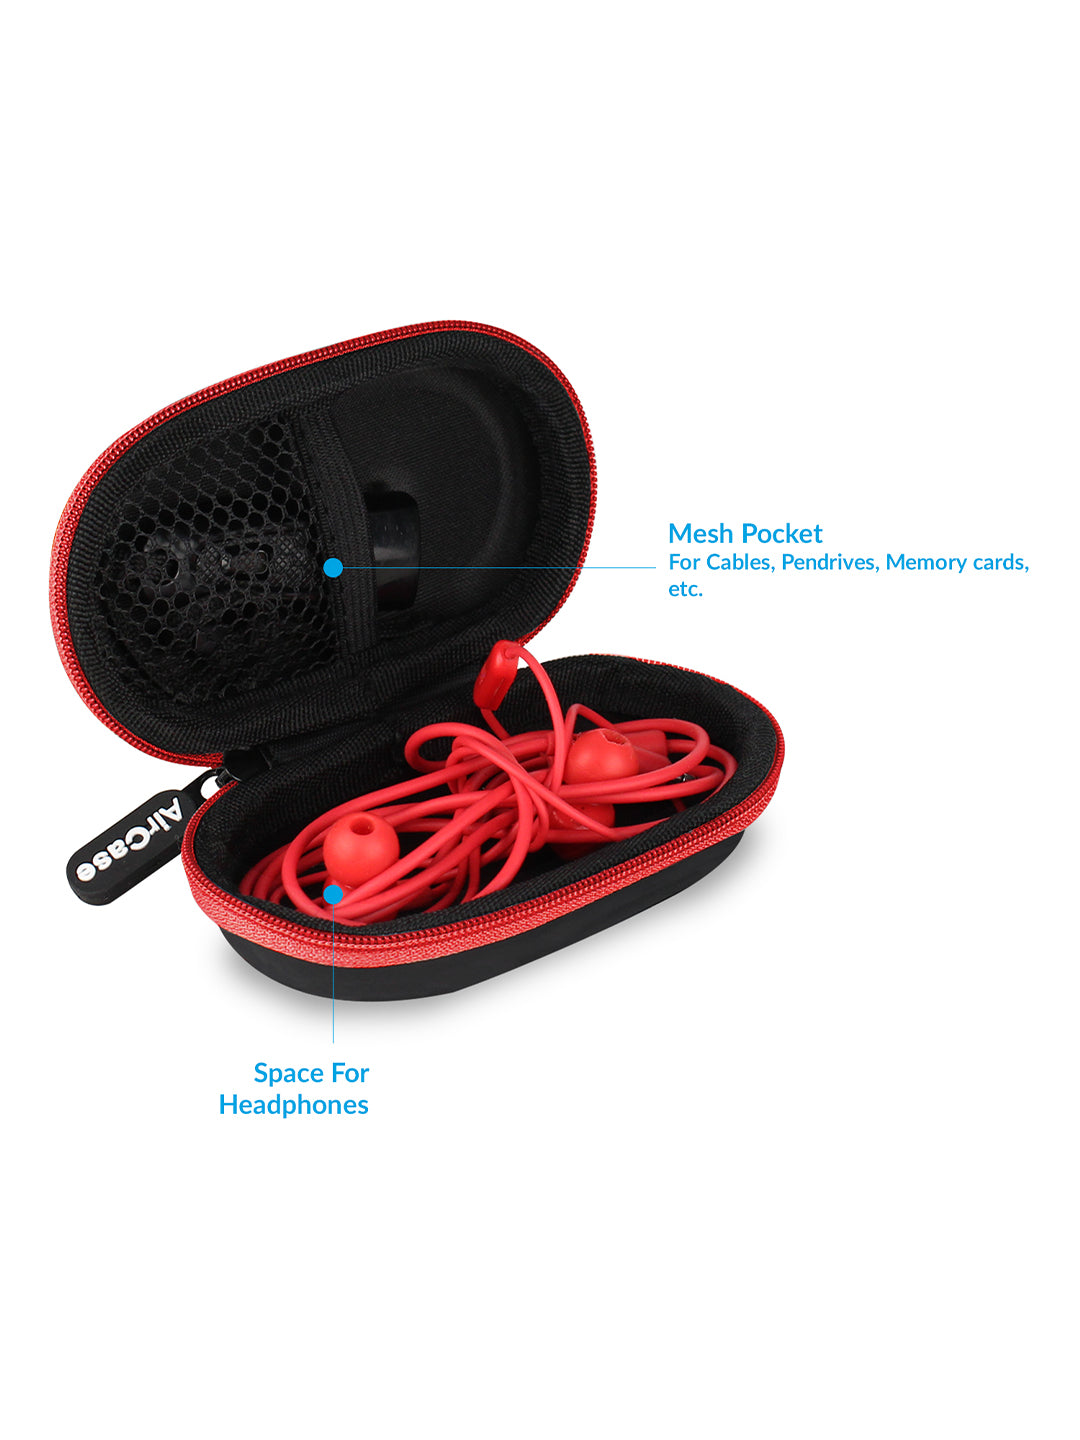 Systematize Earphone Carrying Case